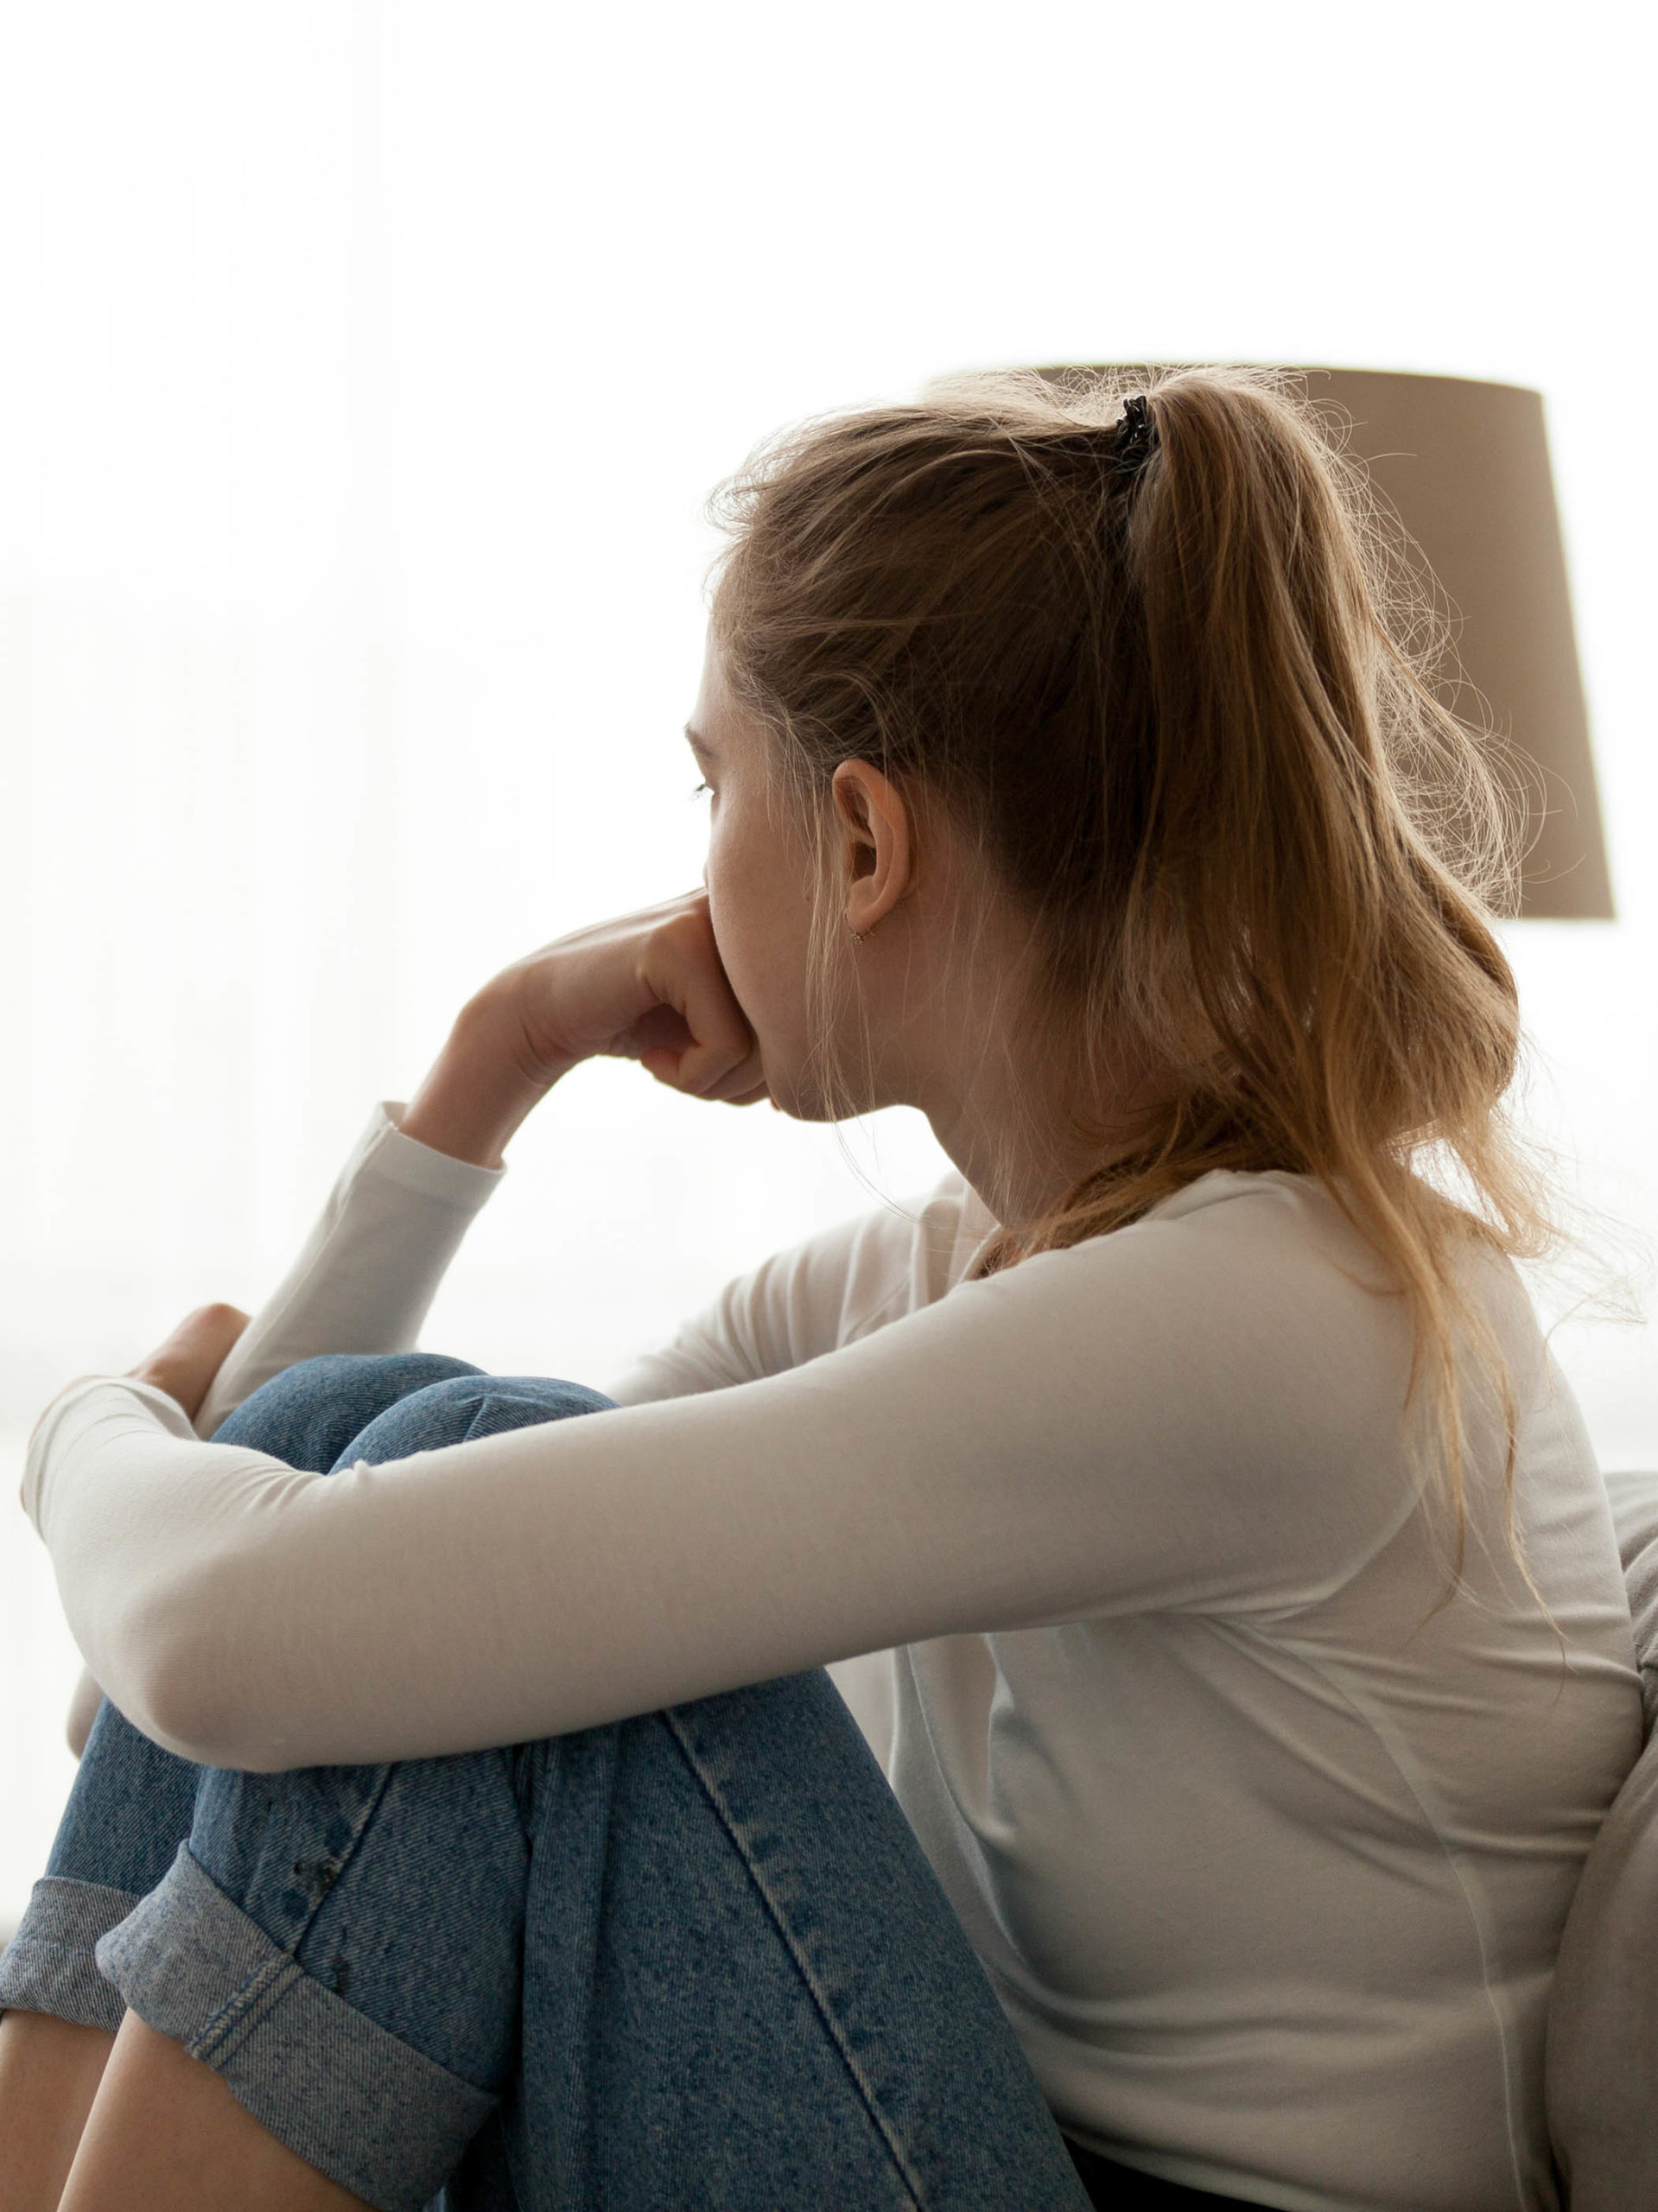 frustrated unhappy teen girl looking out the window thinking